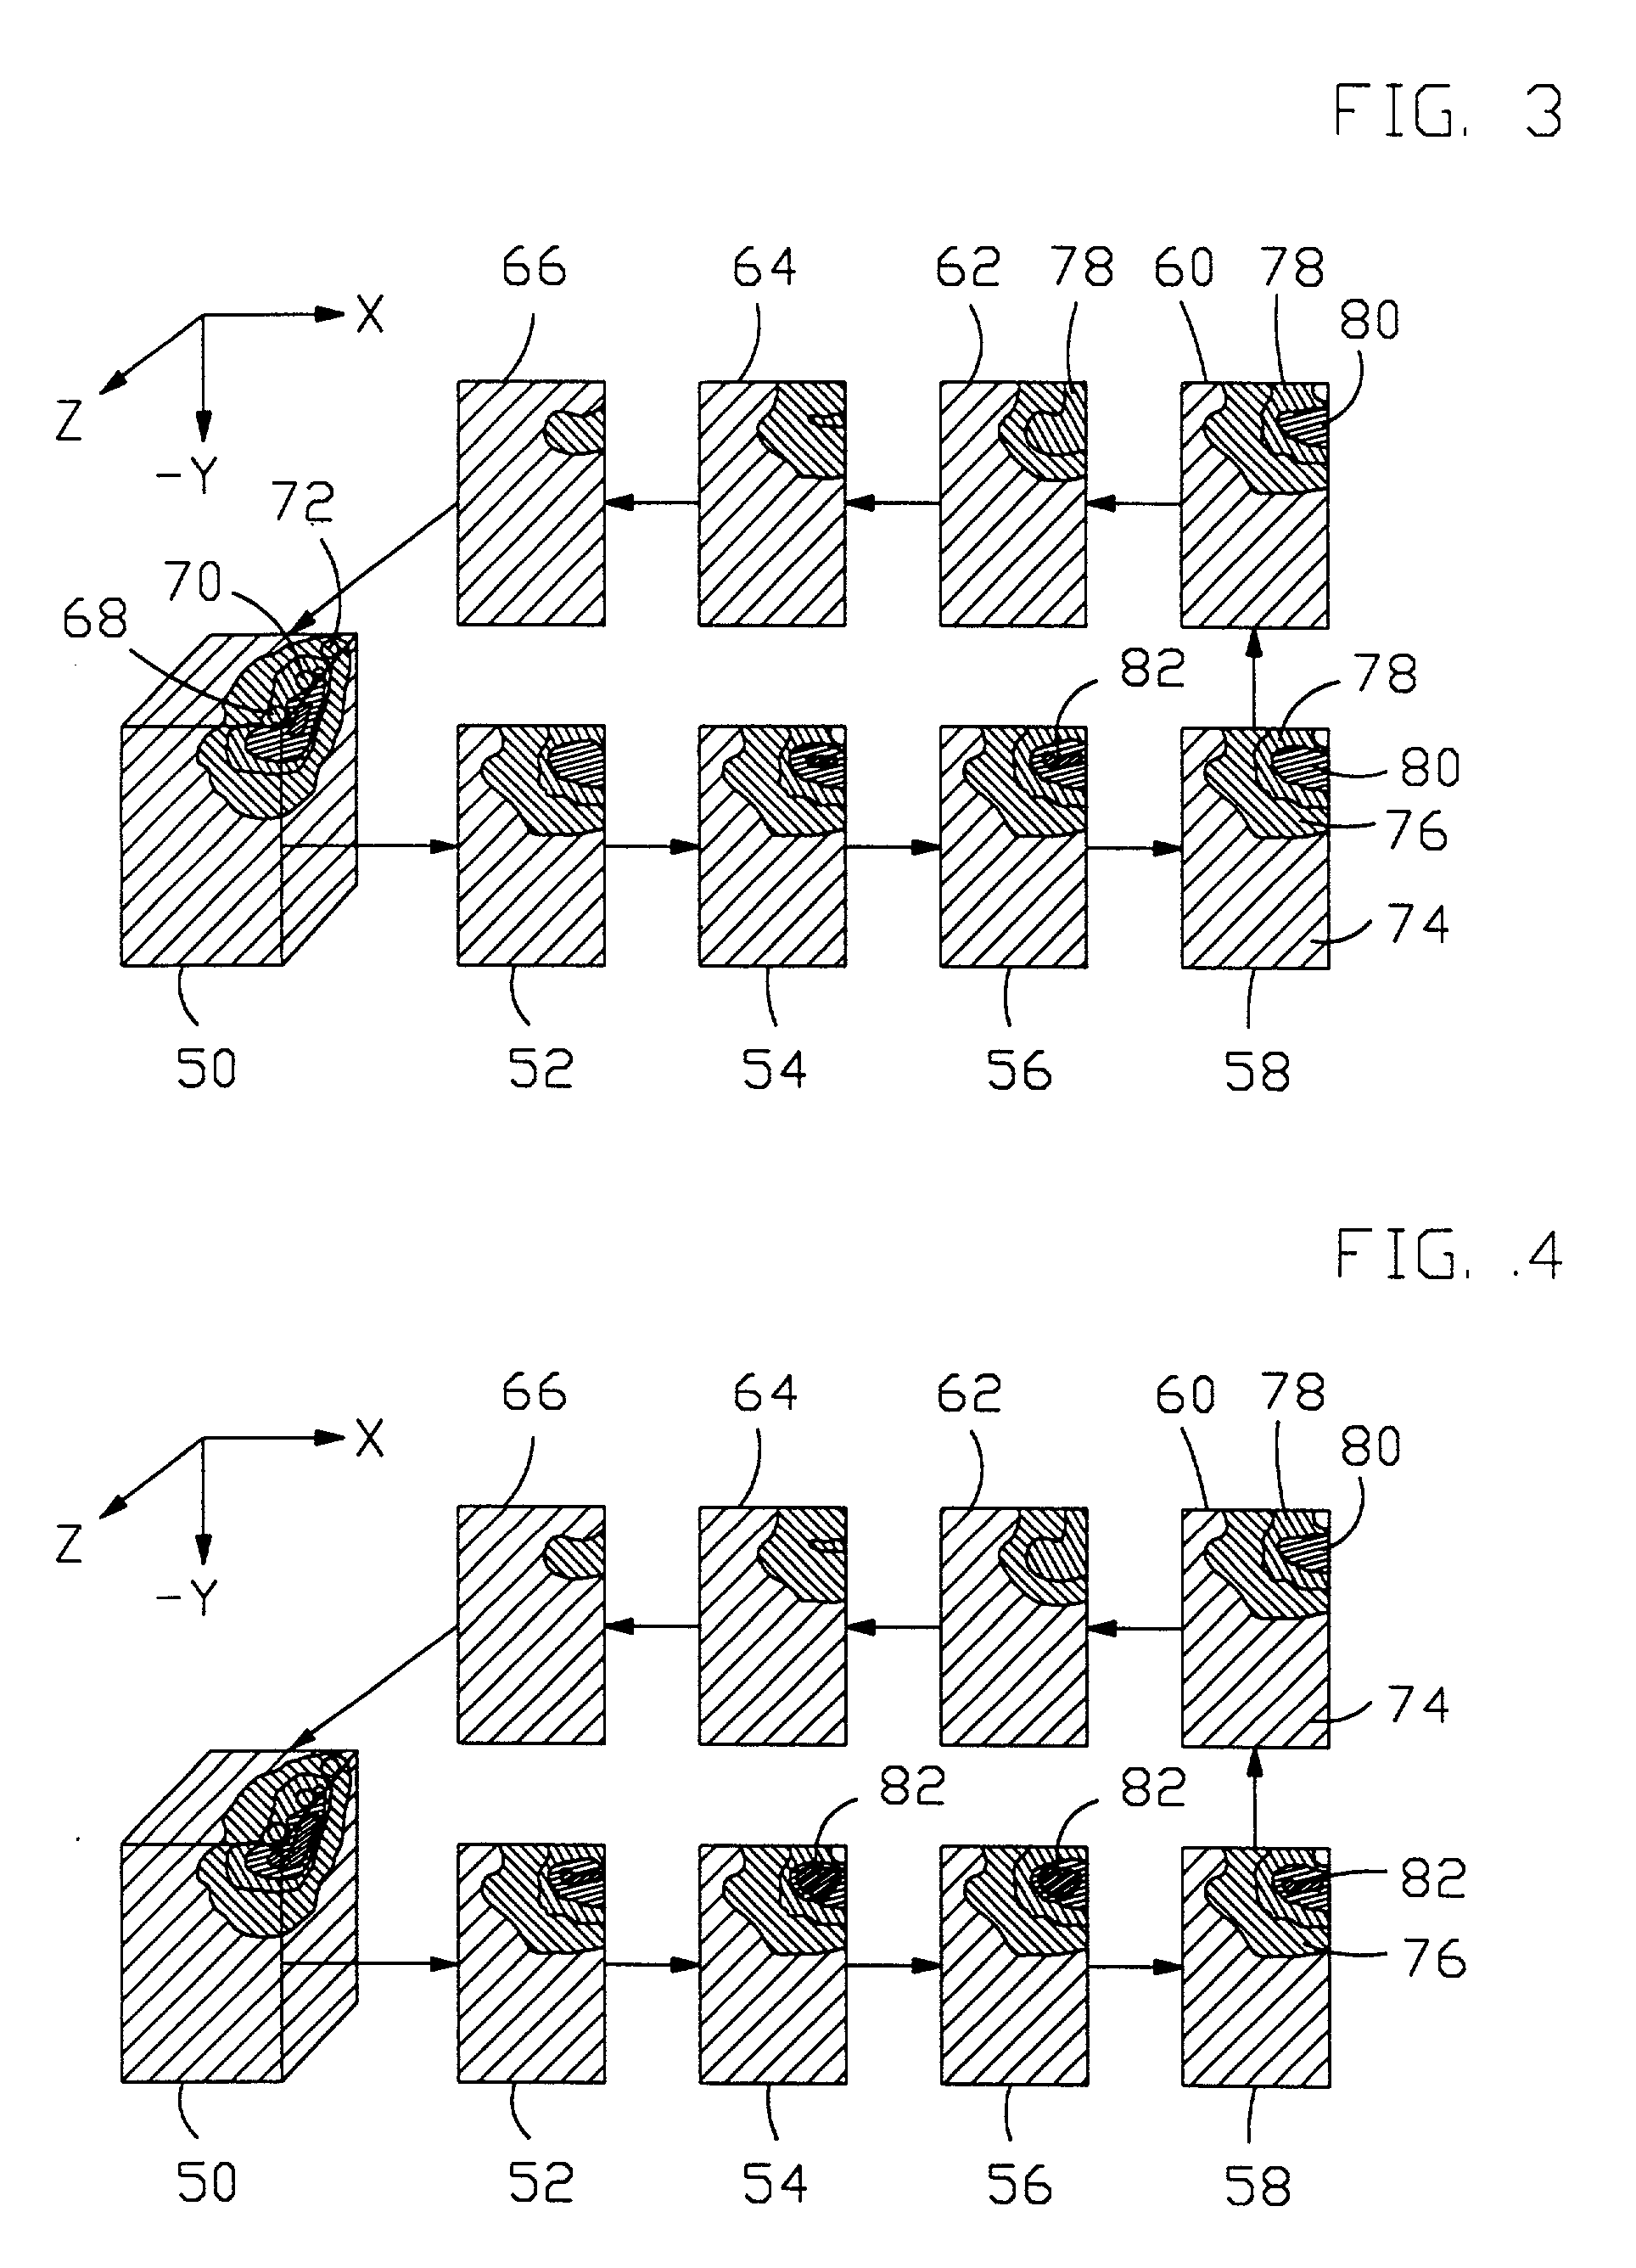 Method of constructing a microwave antenna